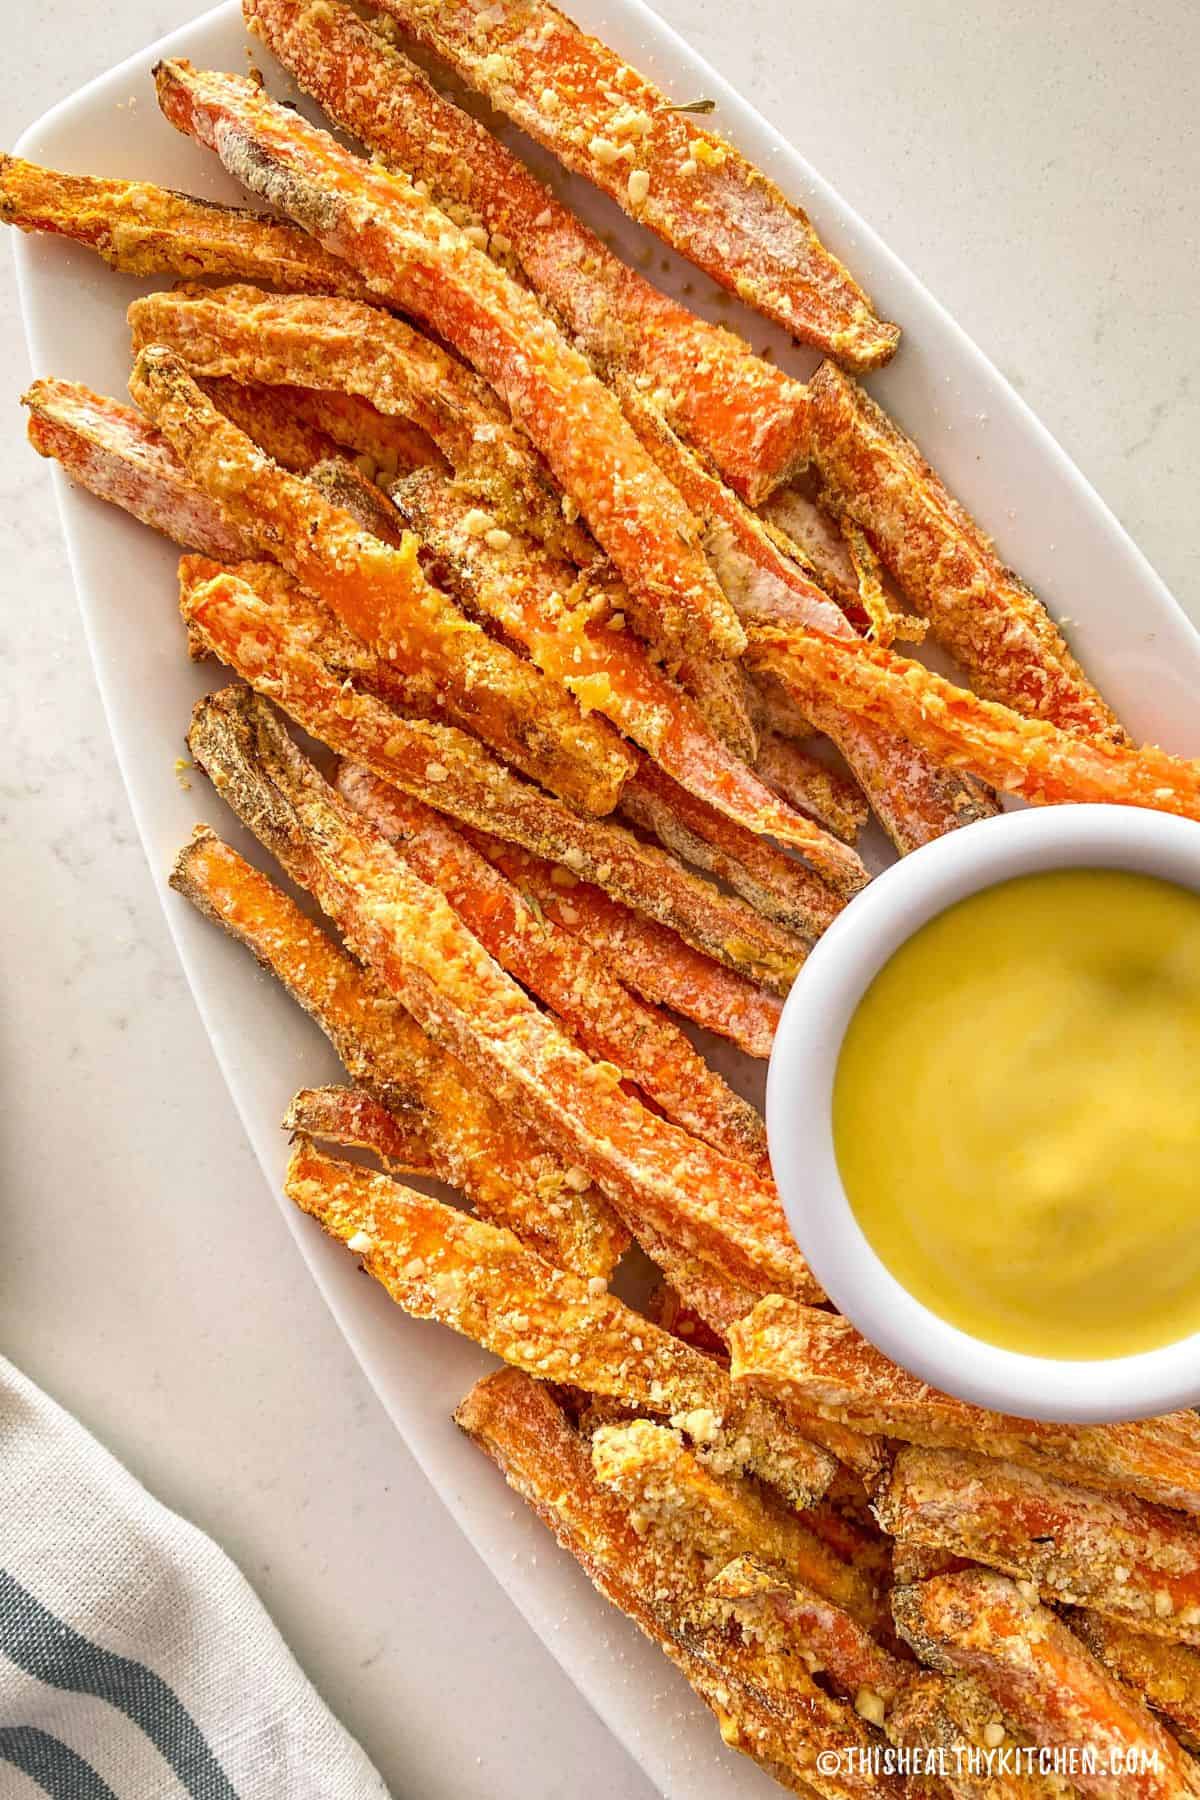 Carrot fries on white platter with yellow dipping sauce.